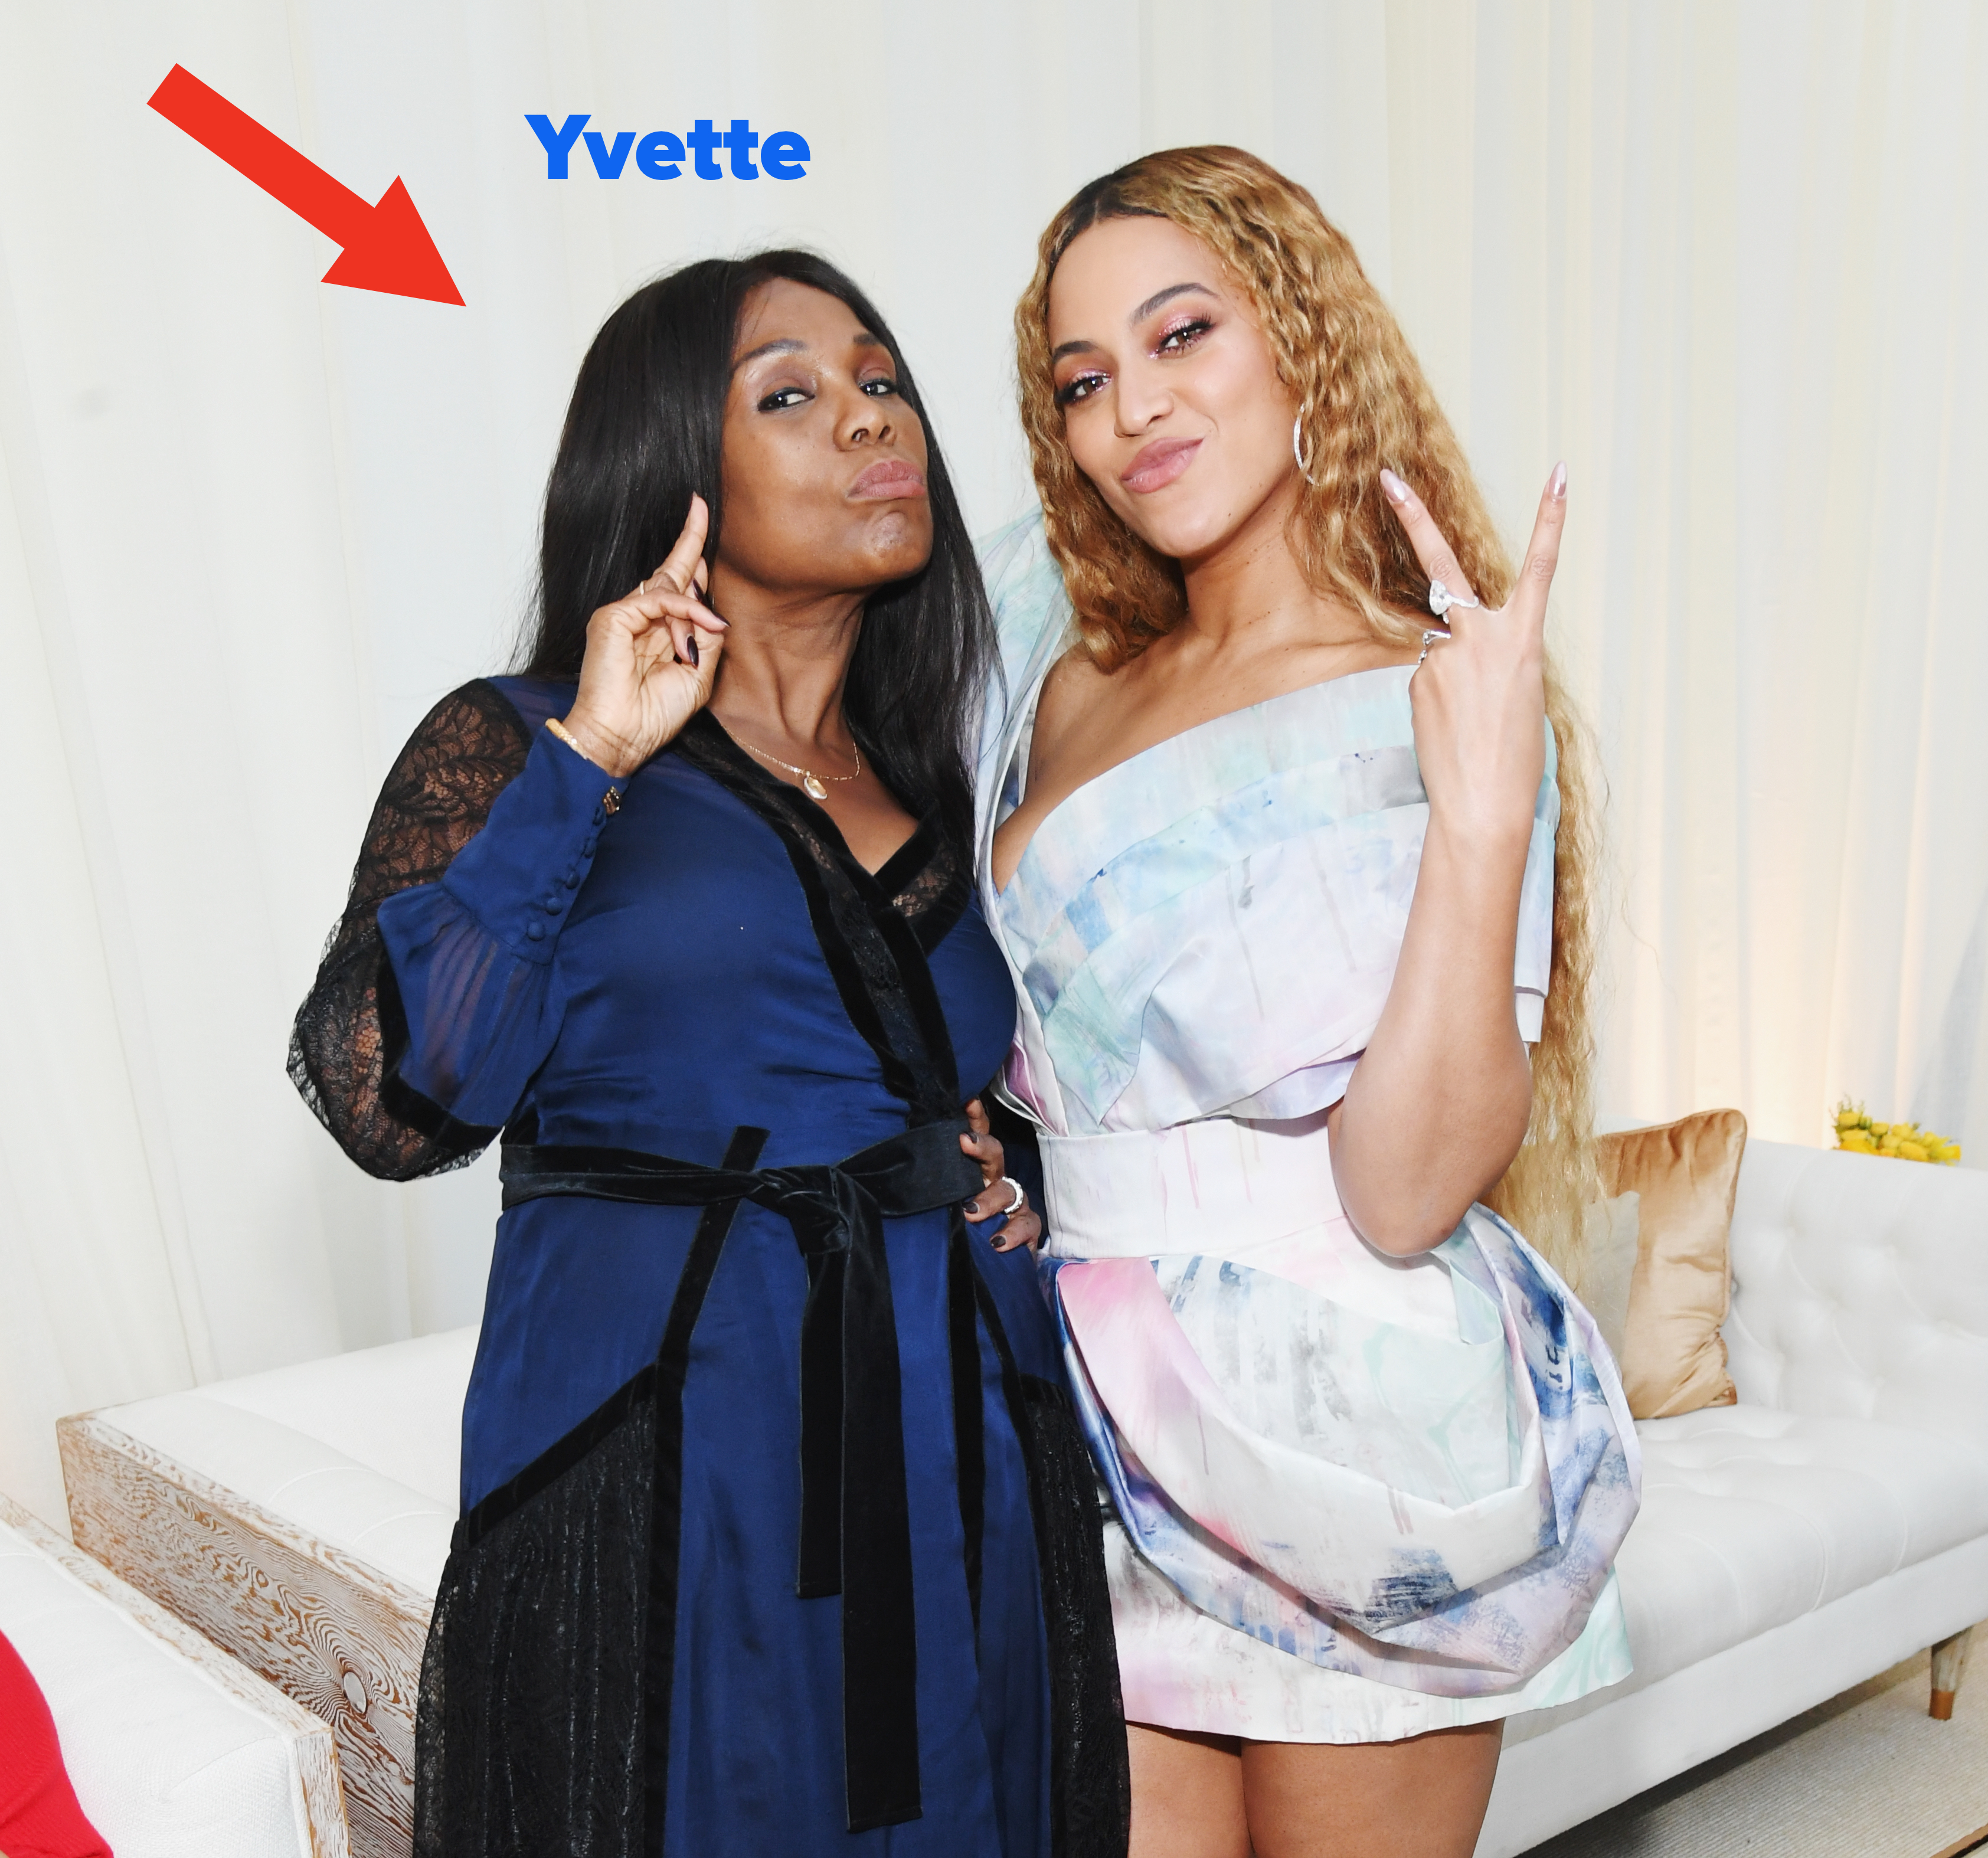 Closeup of Yvette and Beyoncé playfully posing for a photo